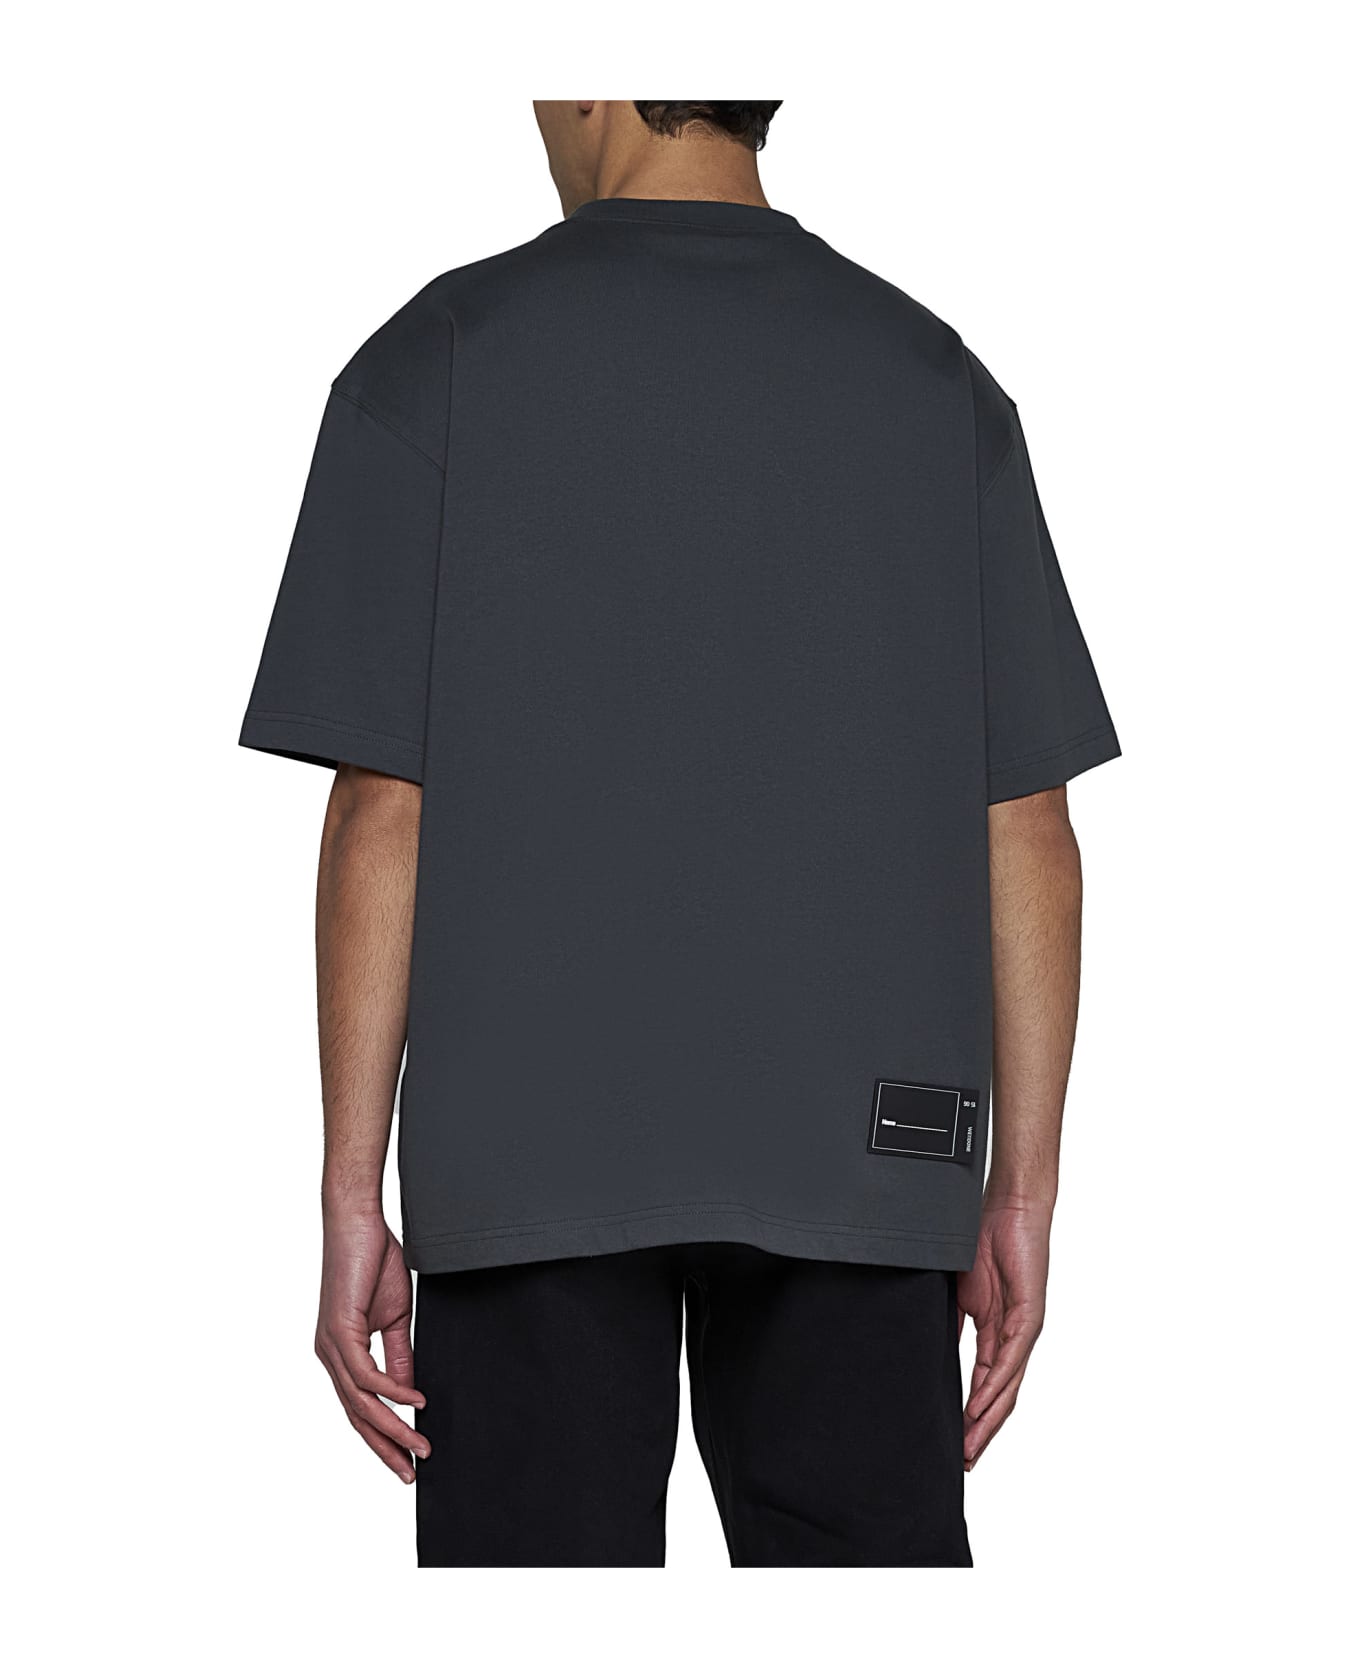 WE11 DONE T-Shirt - Charcoal